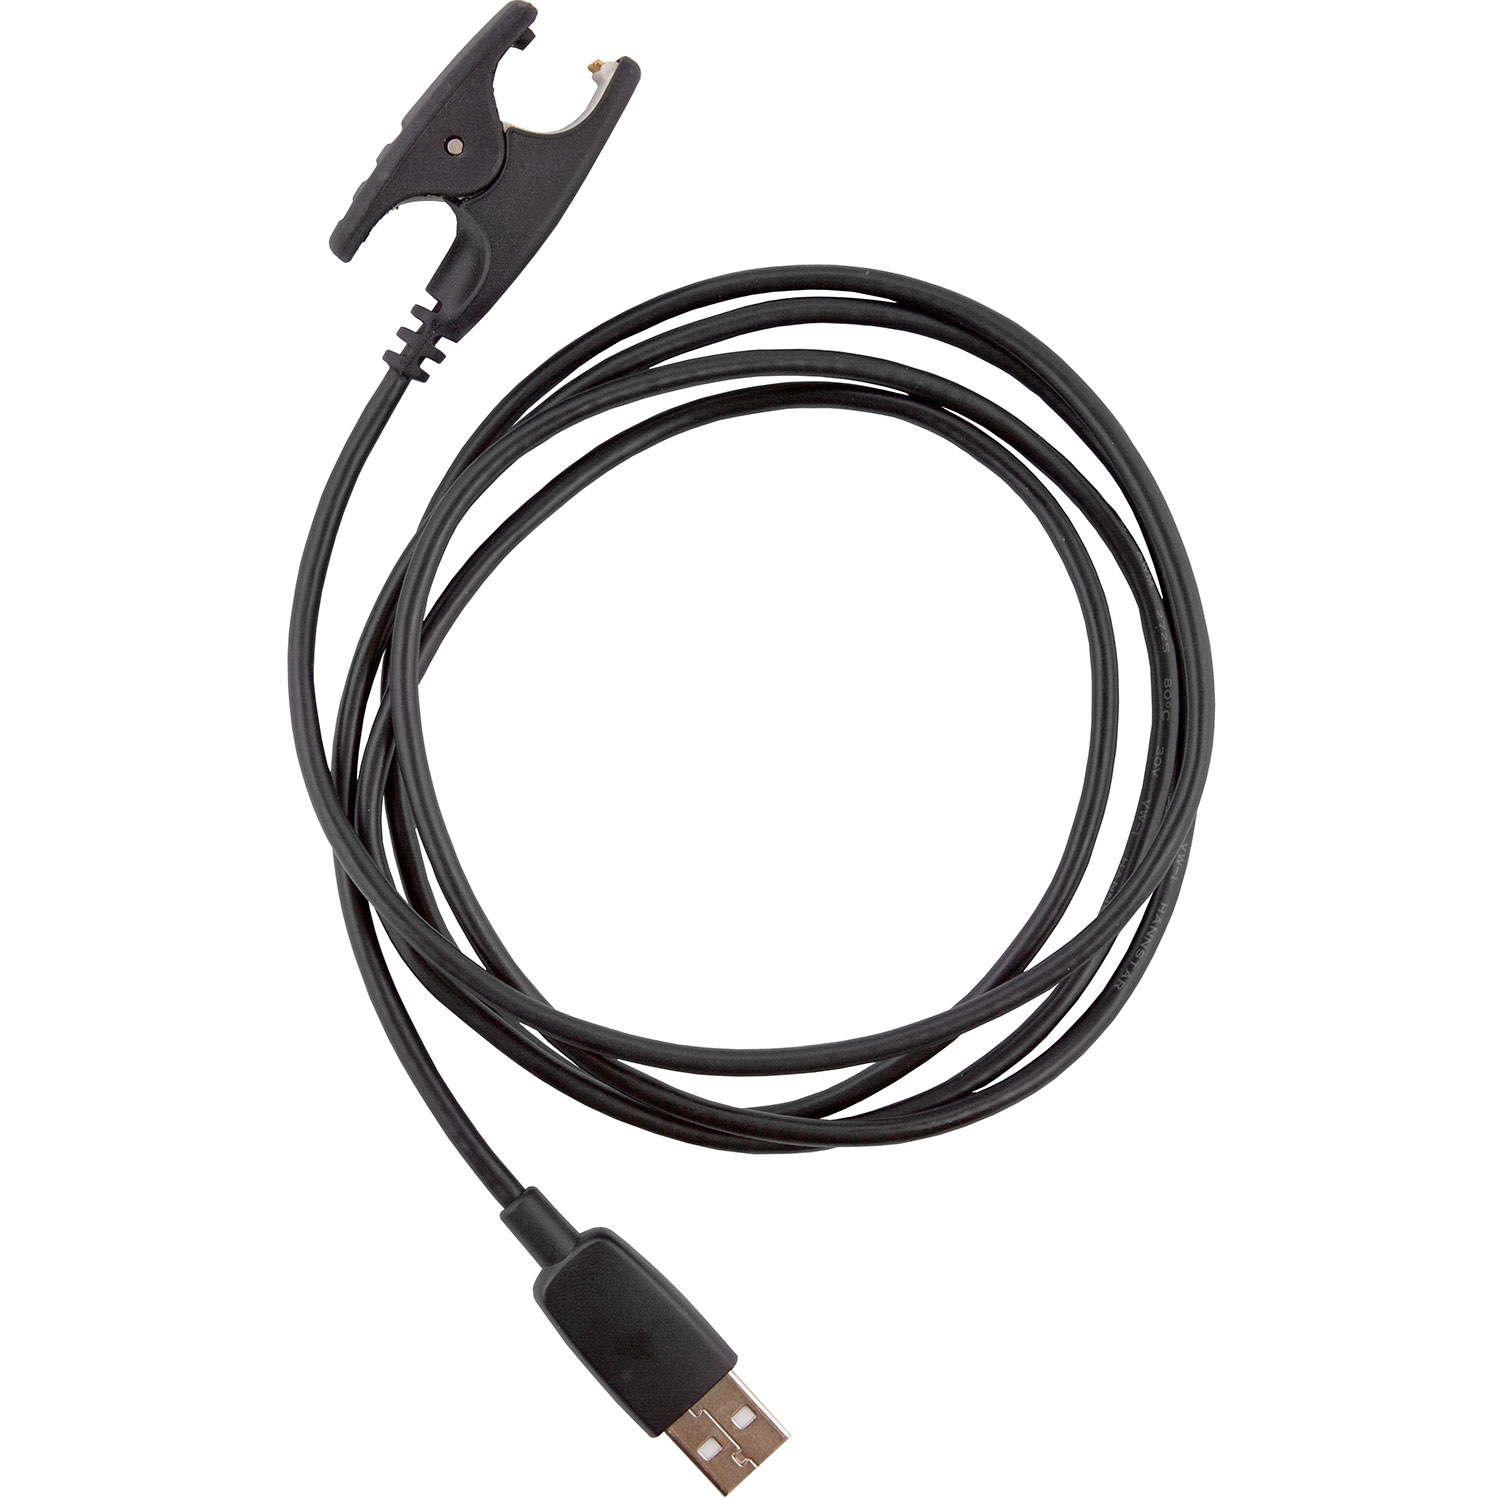 Ambit Power Cable